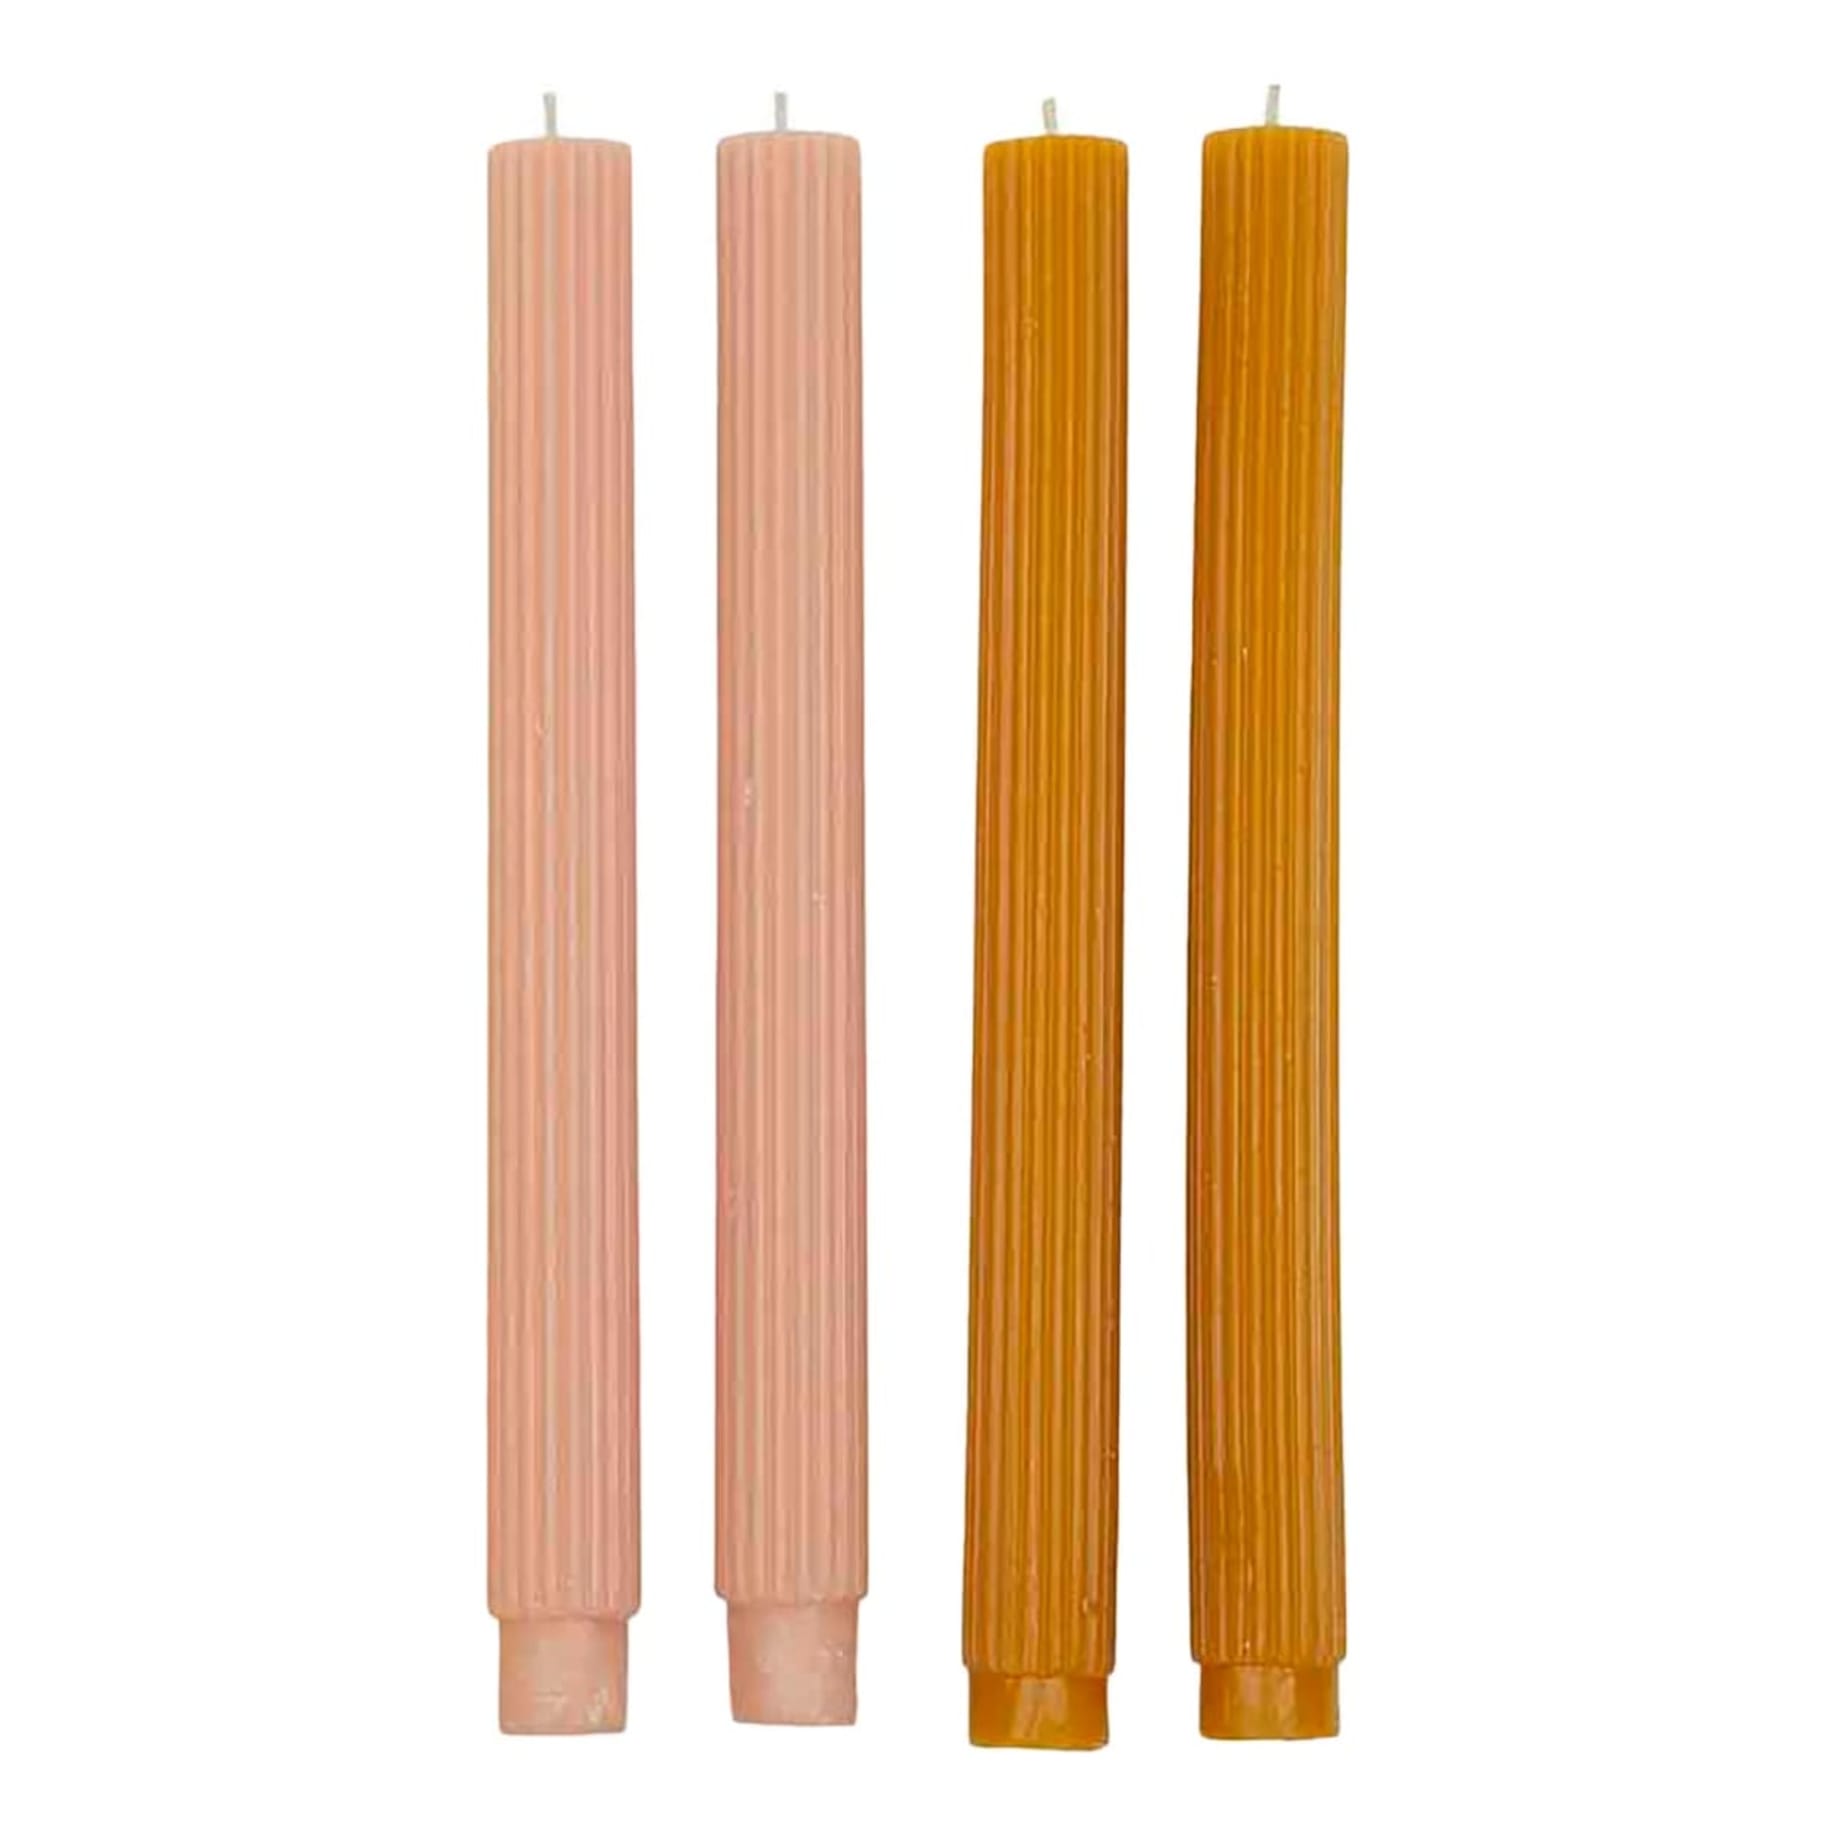 Ribbed Candles Set of 4 in Shades of Sand